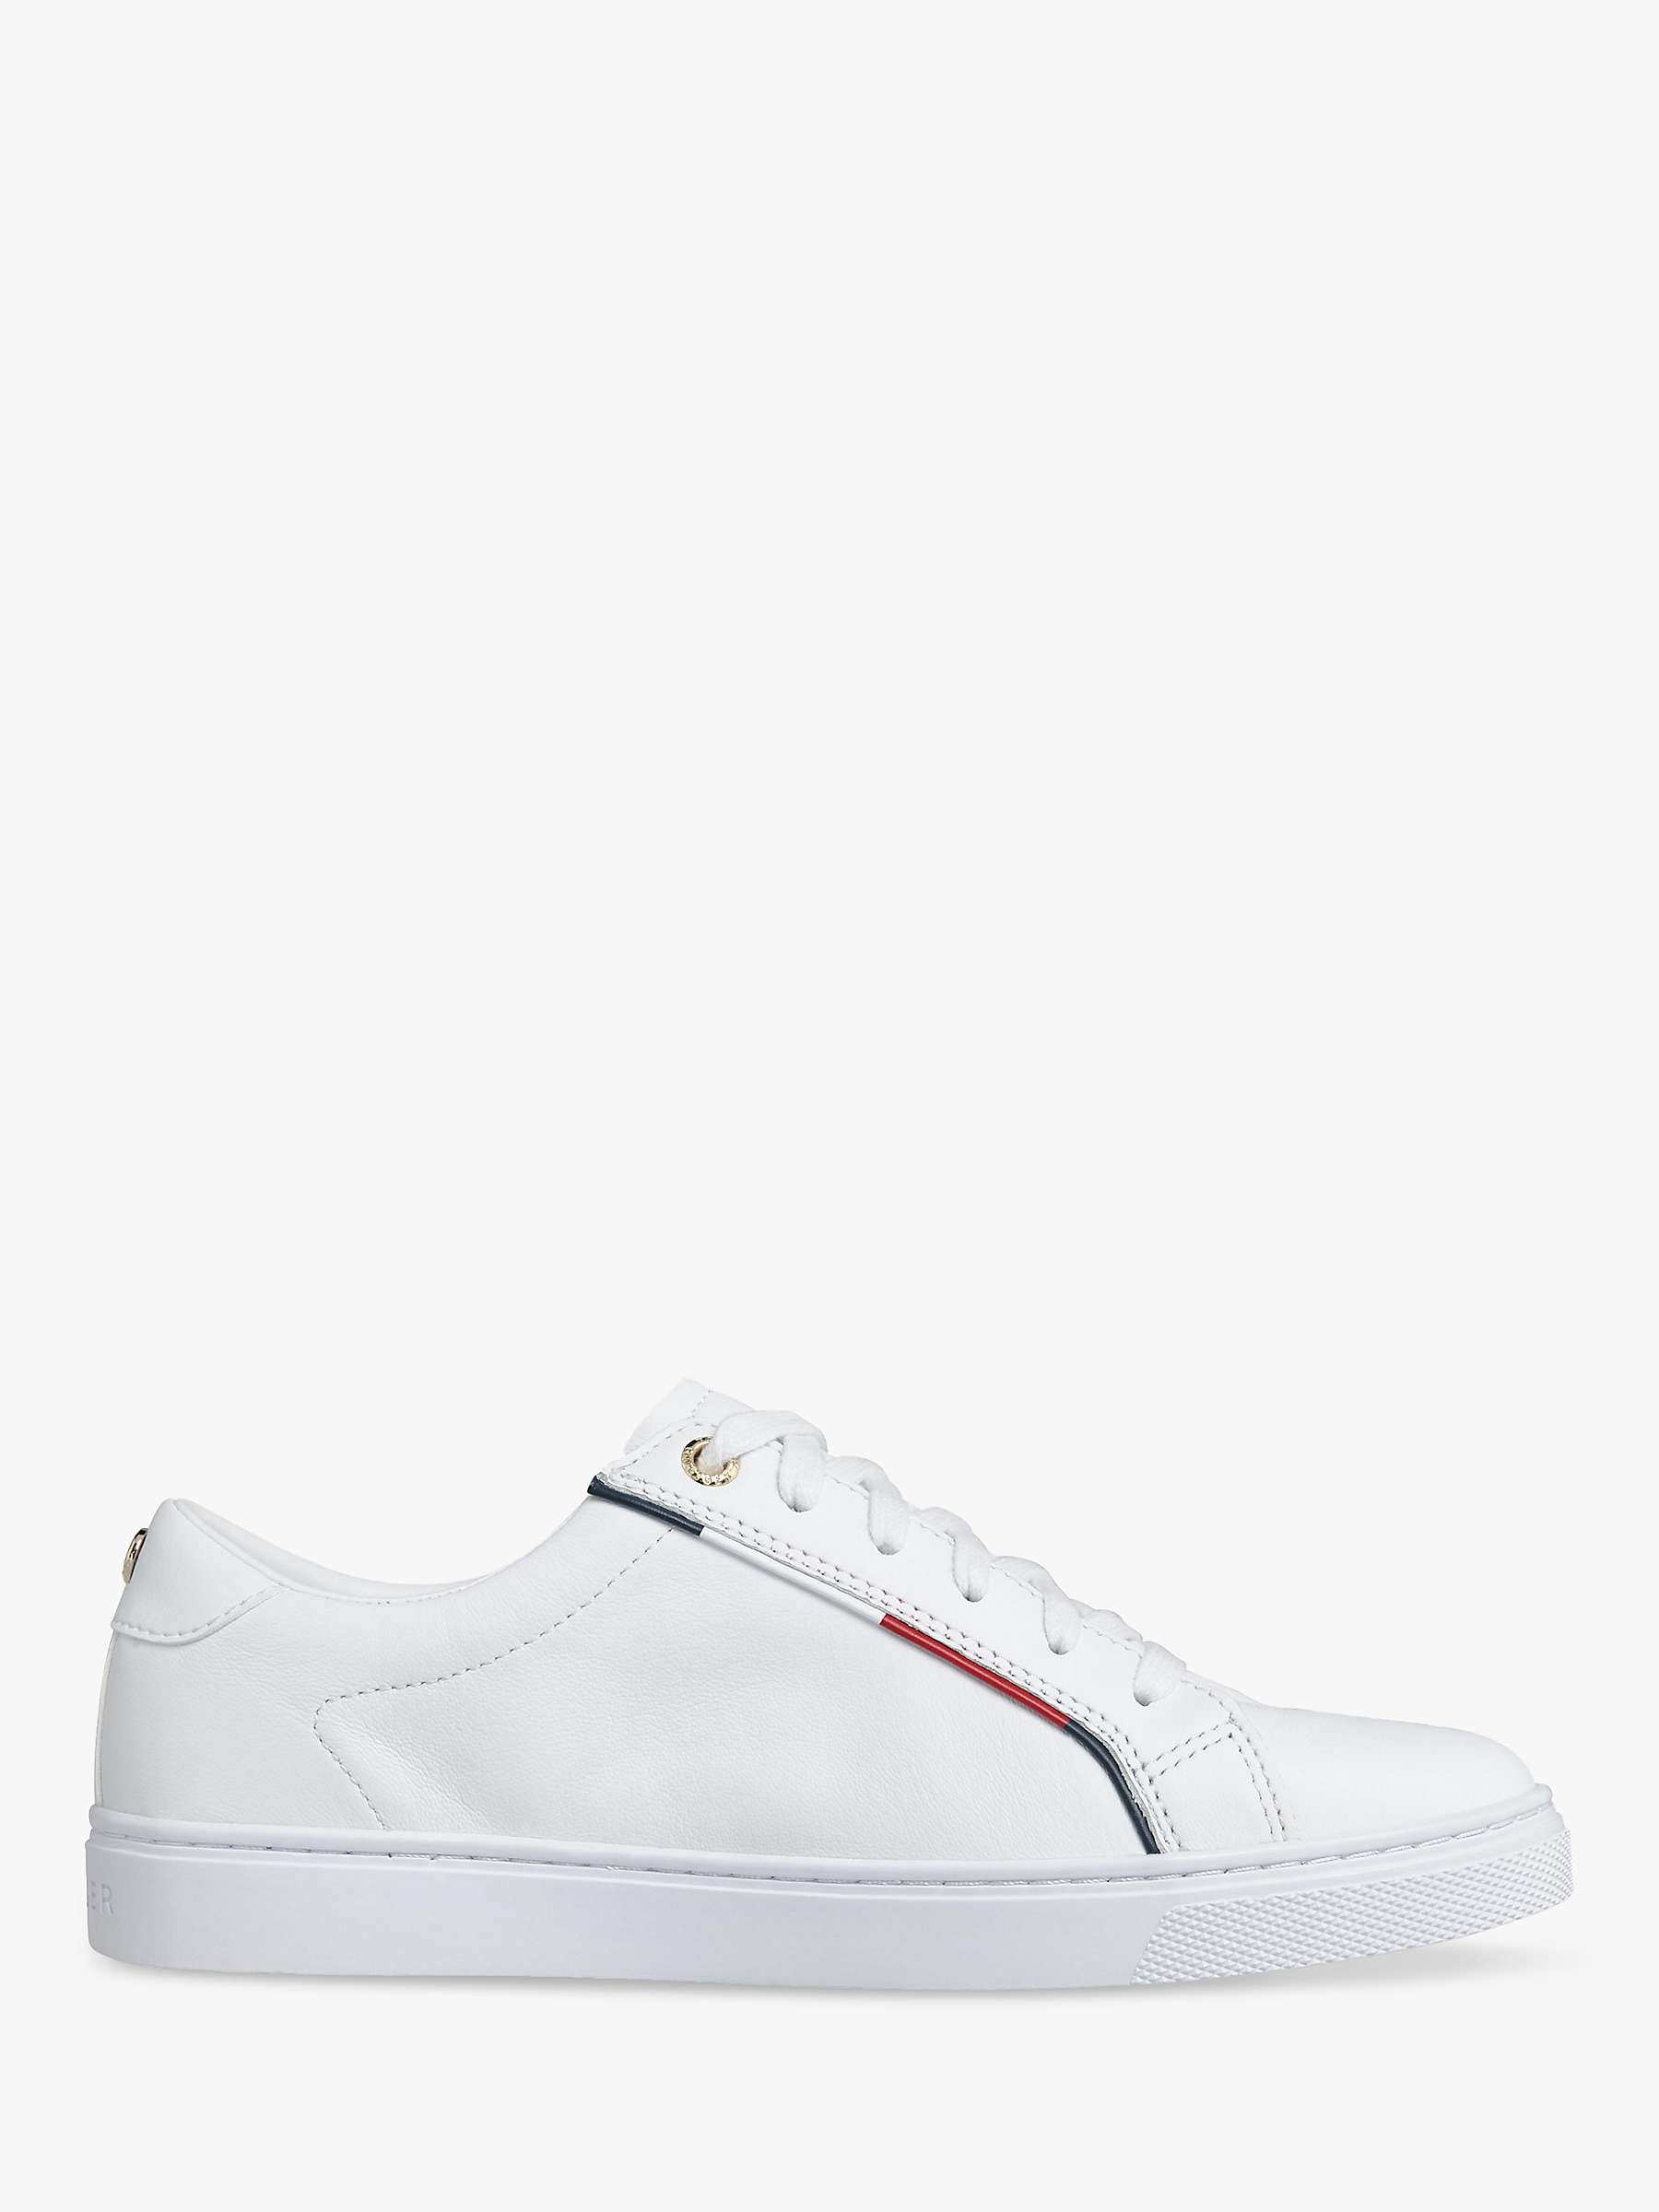 Buy Tommy Hilfiger Signature Leather Trainers, White Online at johnlewis.com